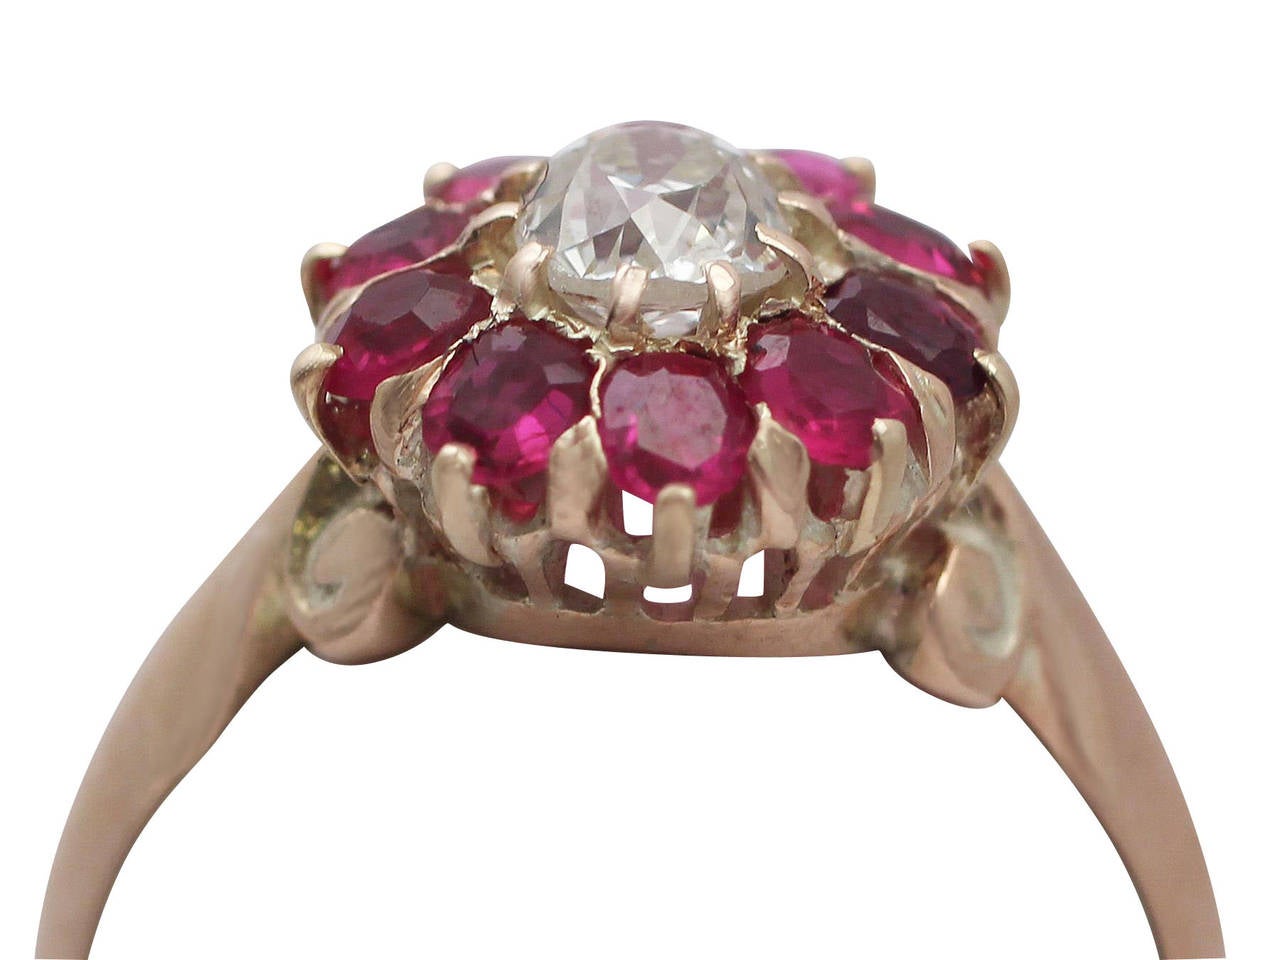 A fine and impressive antique 0.60 carat natural ruby and 0.38 carat diamond, 9 karat rose gold dress ring; part of our antique jewelry and estate jewelry collections

This impressive ruby and diamond cluster ring has been crafted in 9k rose